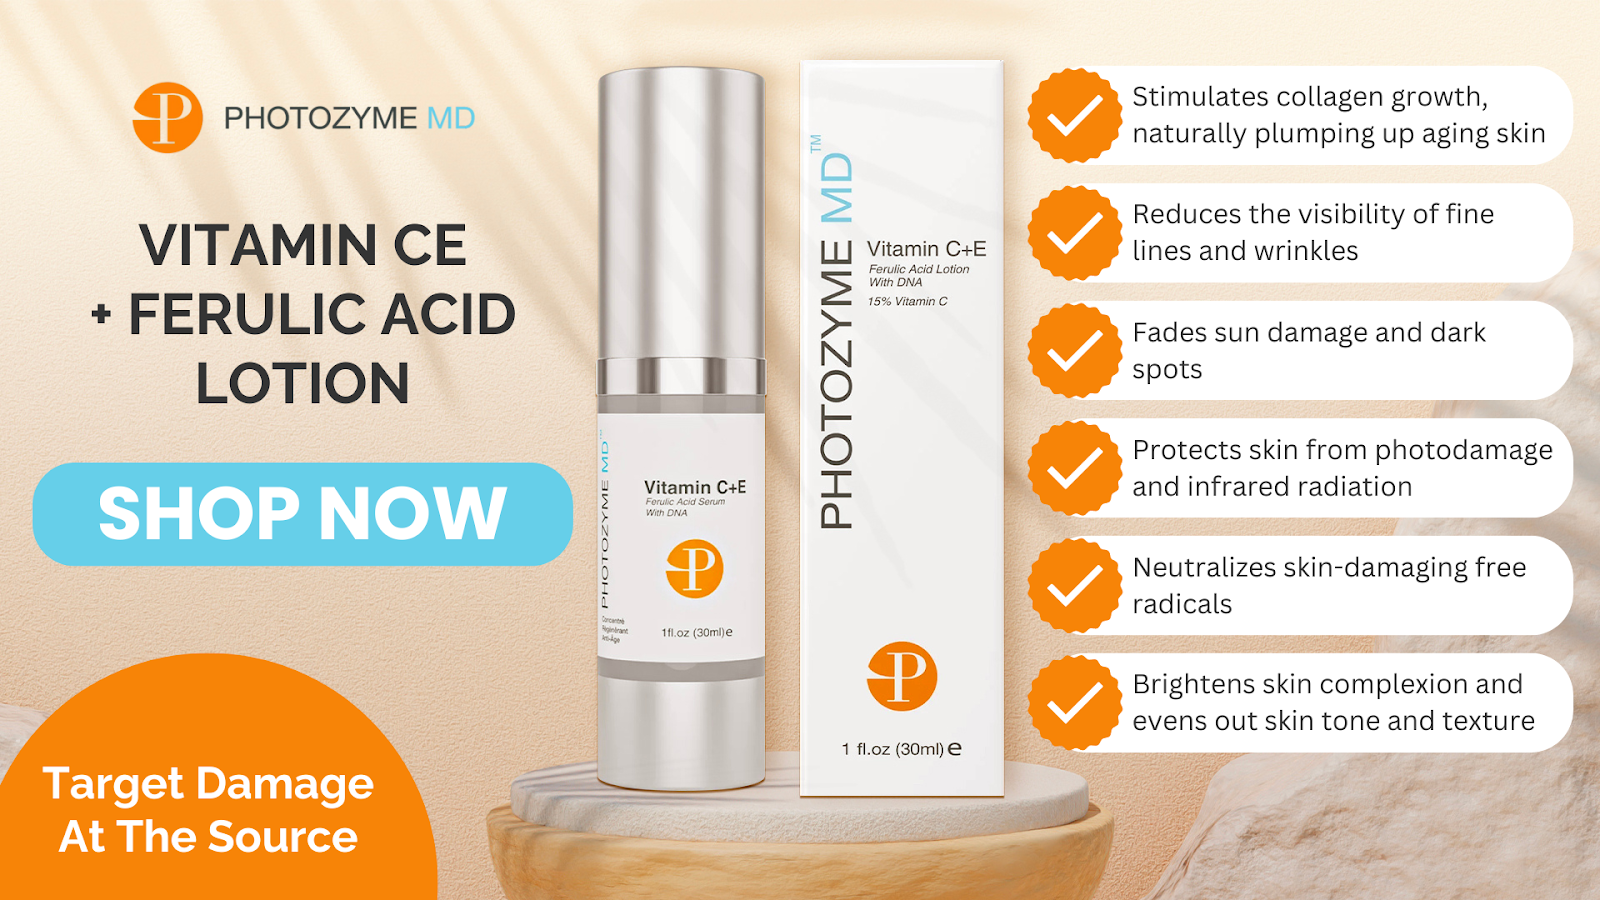 Skincare with Vitamin CE and Ferulic Acid also fights aging